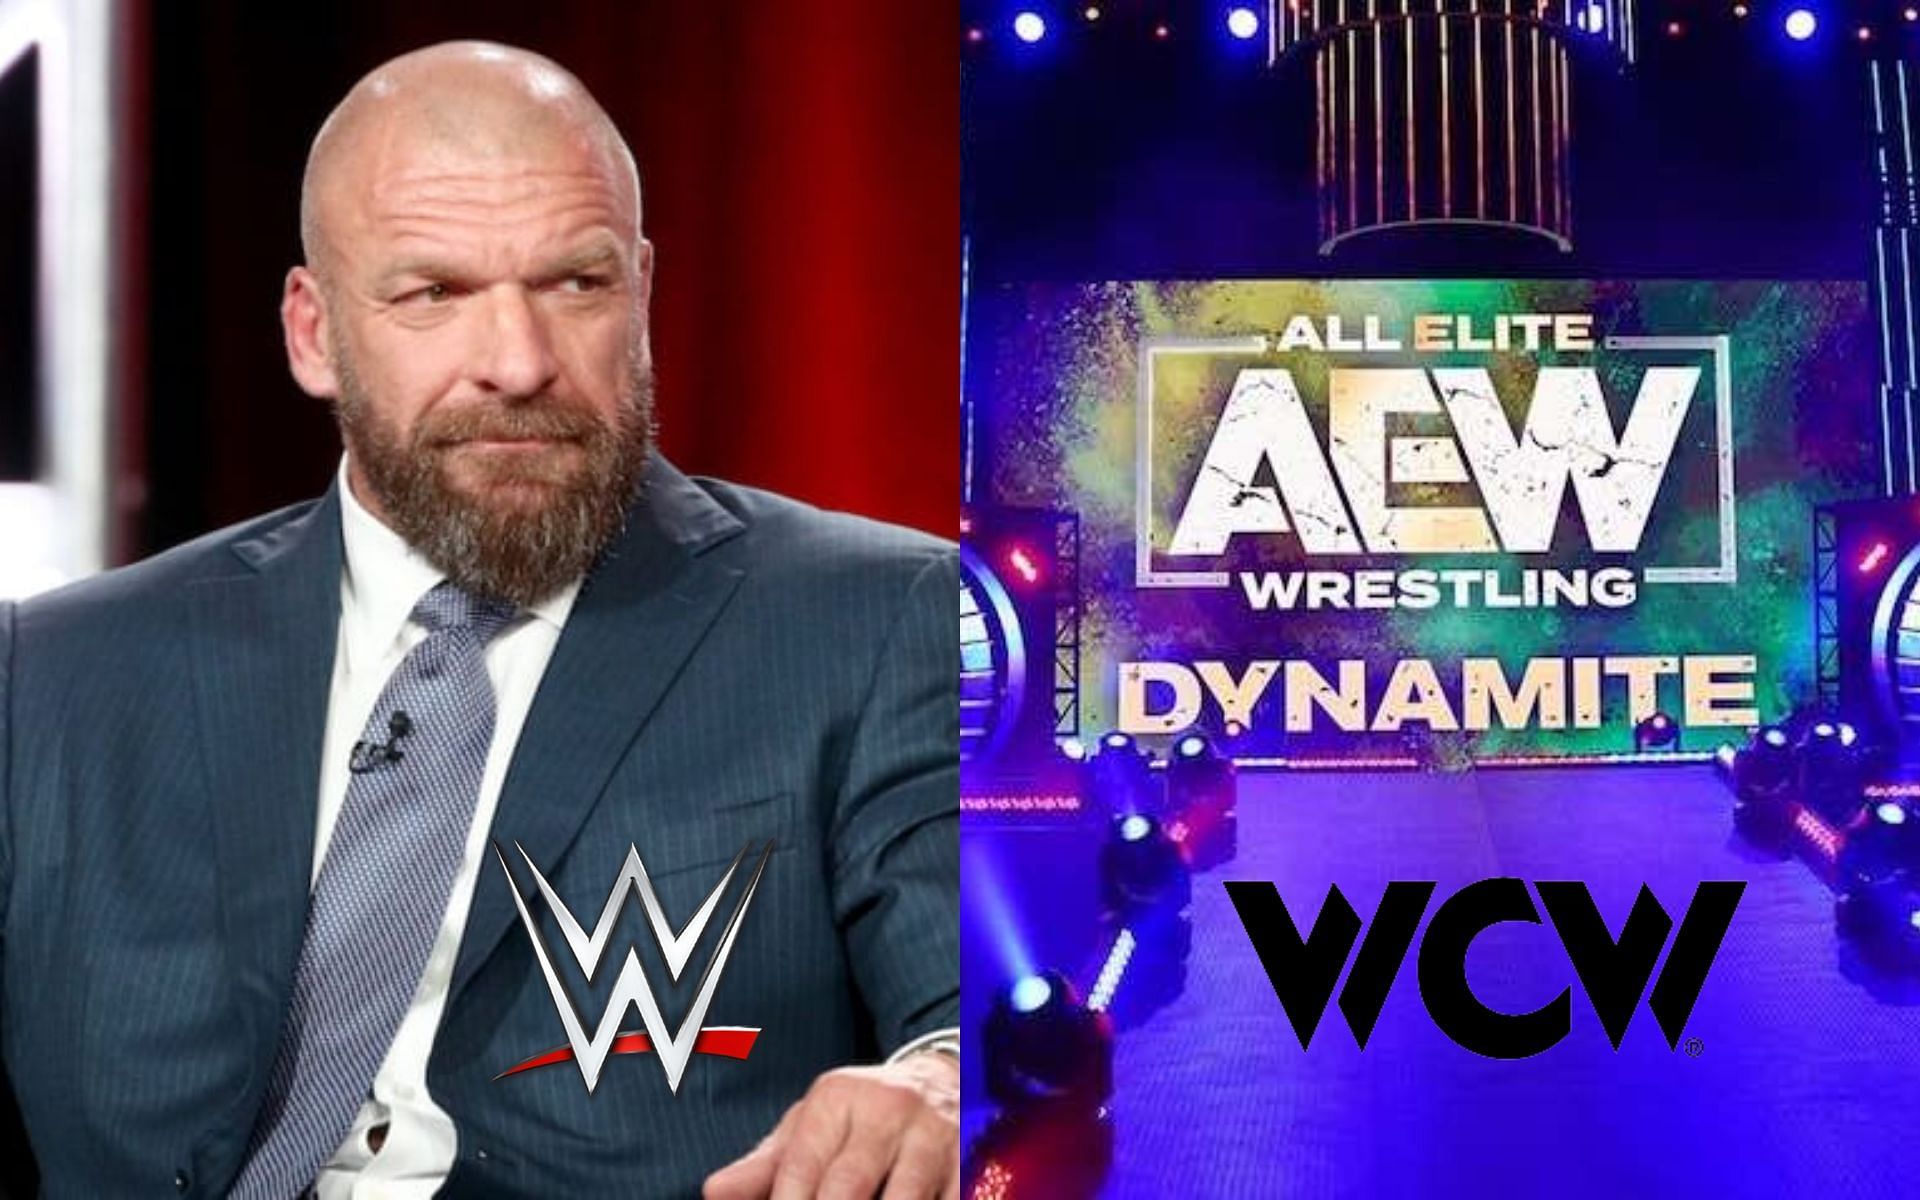 WWE CCO Triple H was referenced by this AEW star last week on Dynamite.